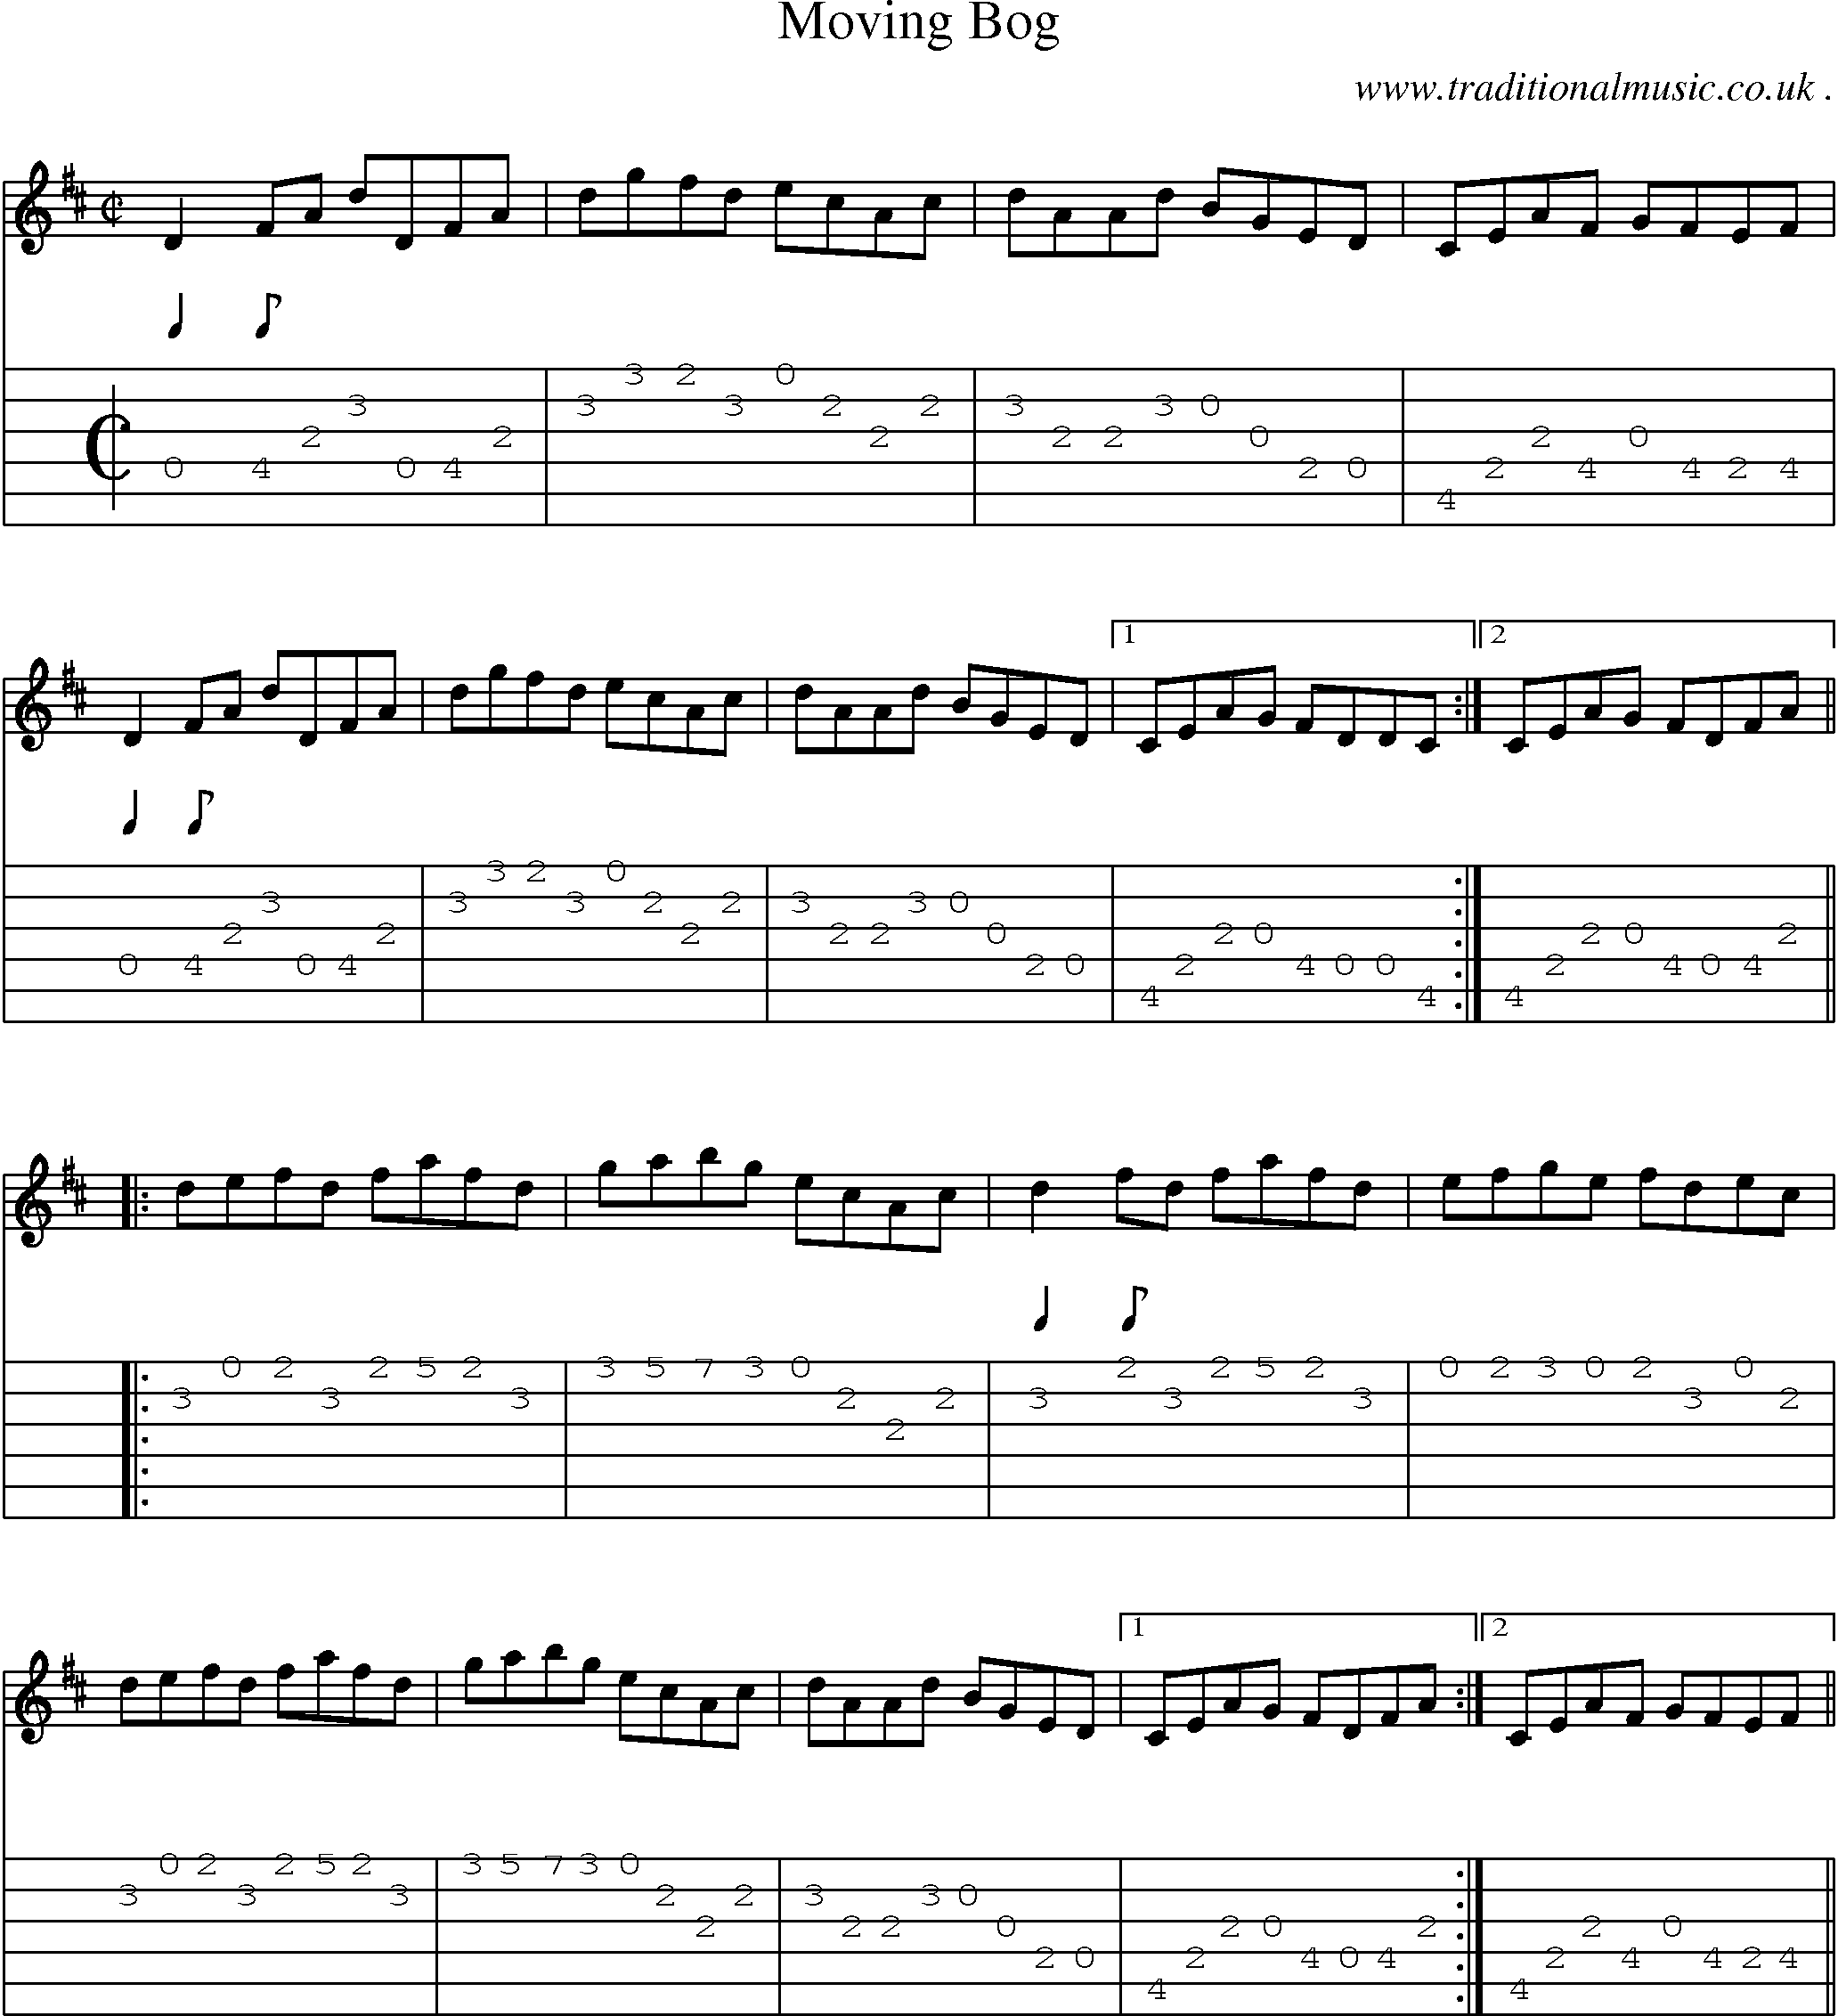 Sheet-Music and Guitar Tabs for Moving Bog